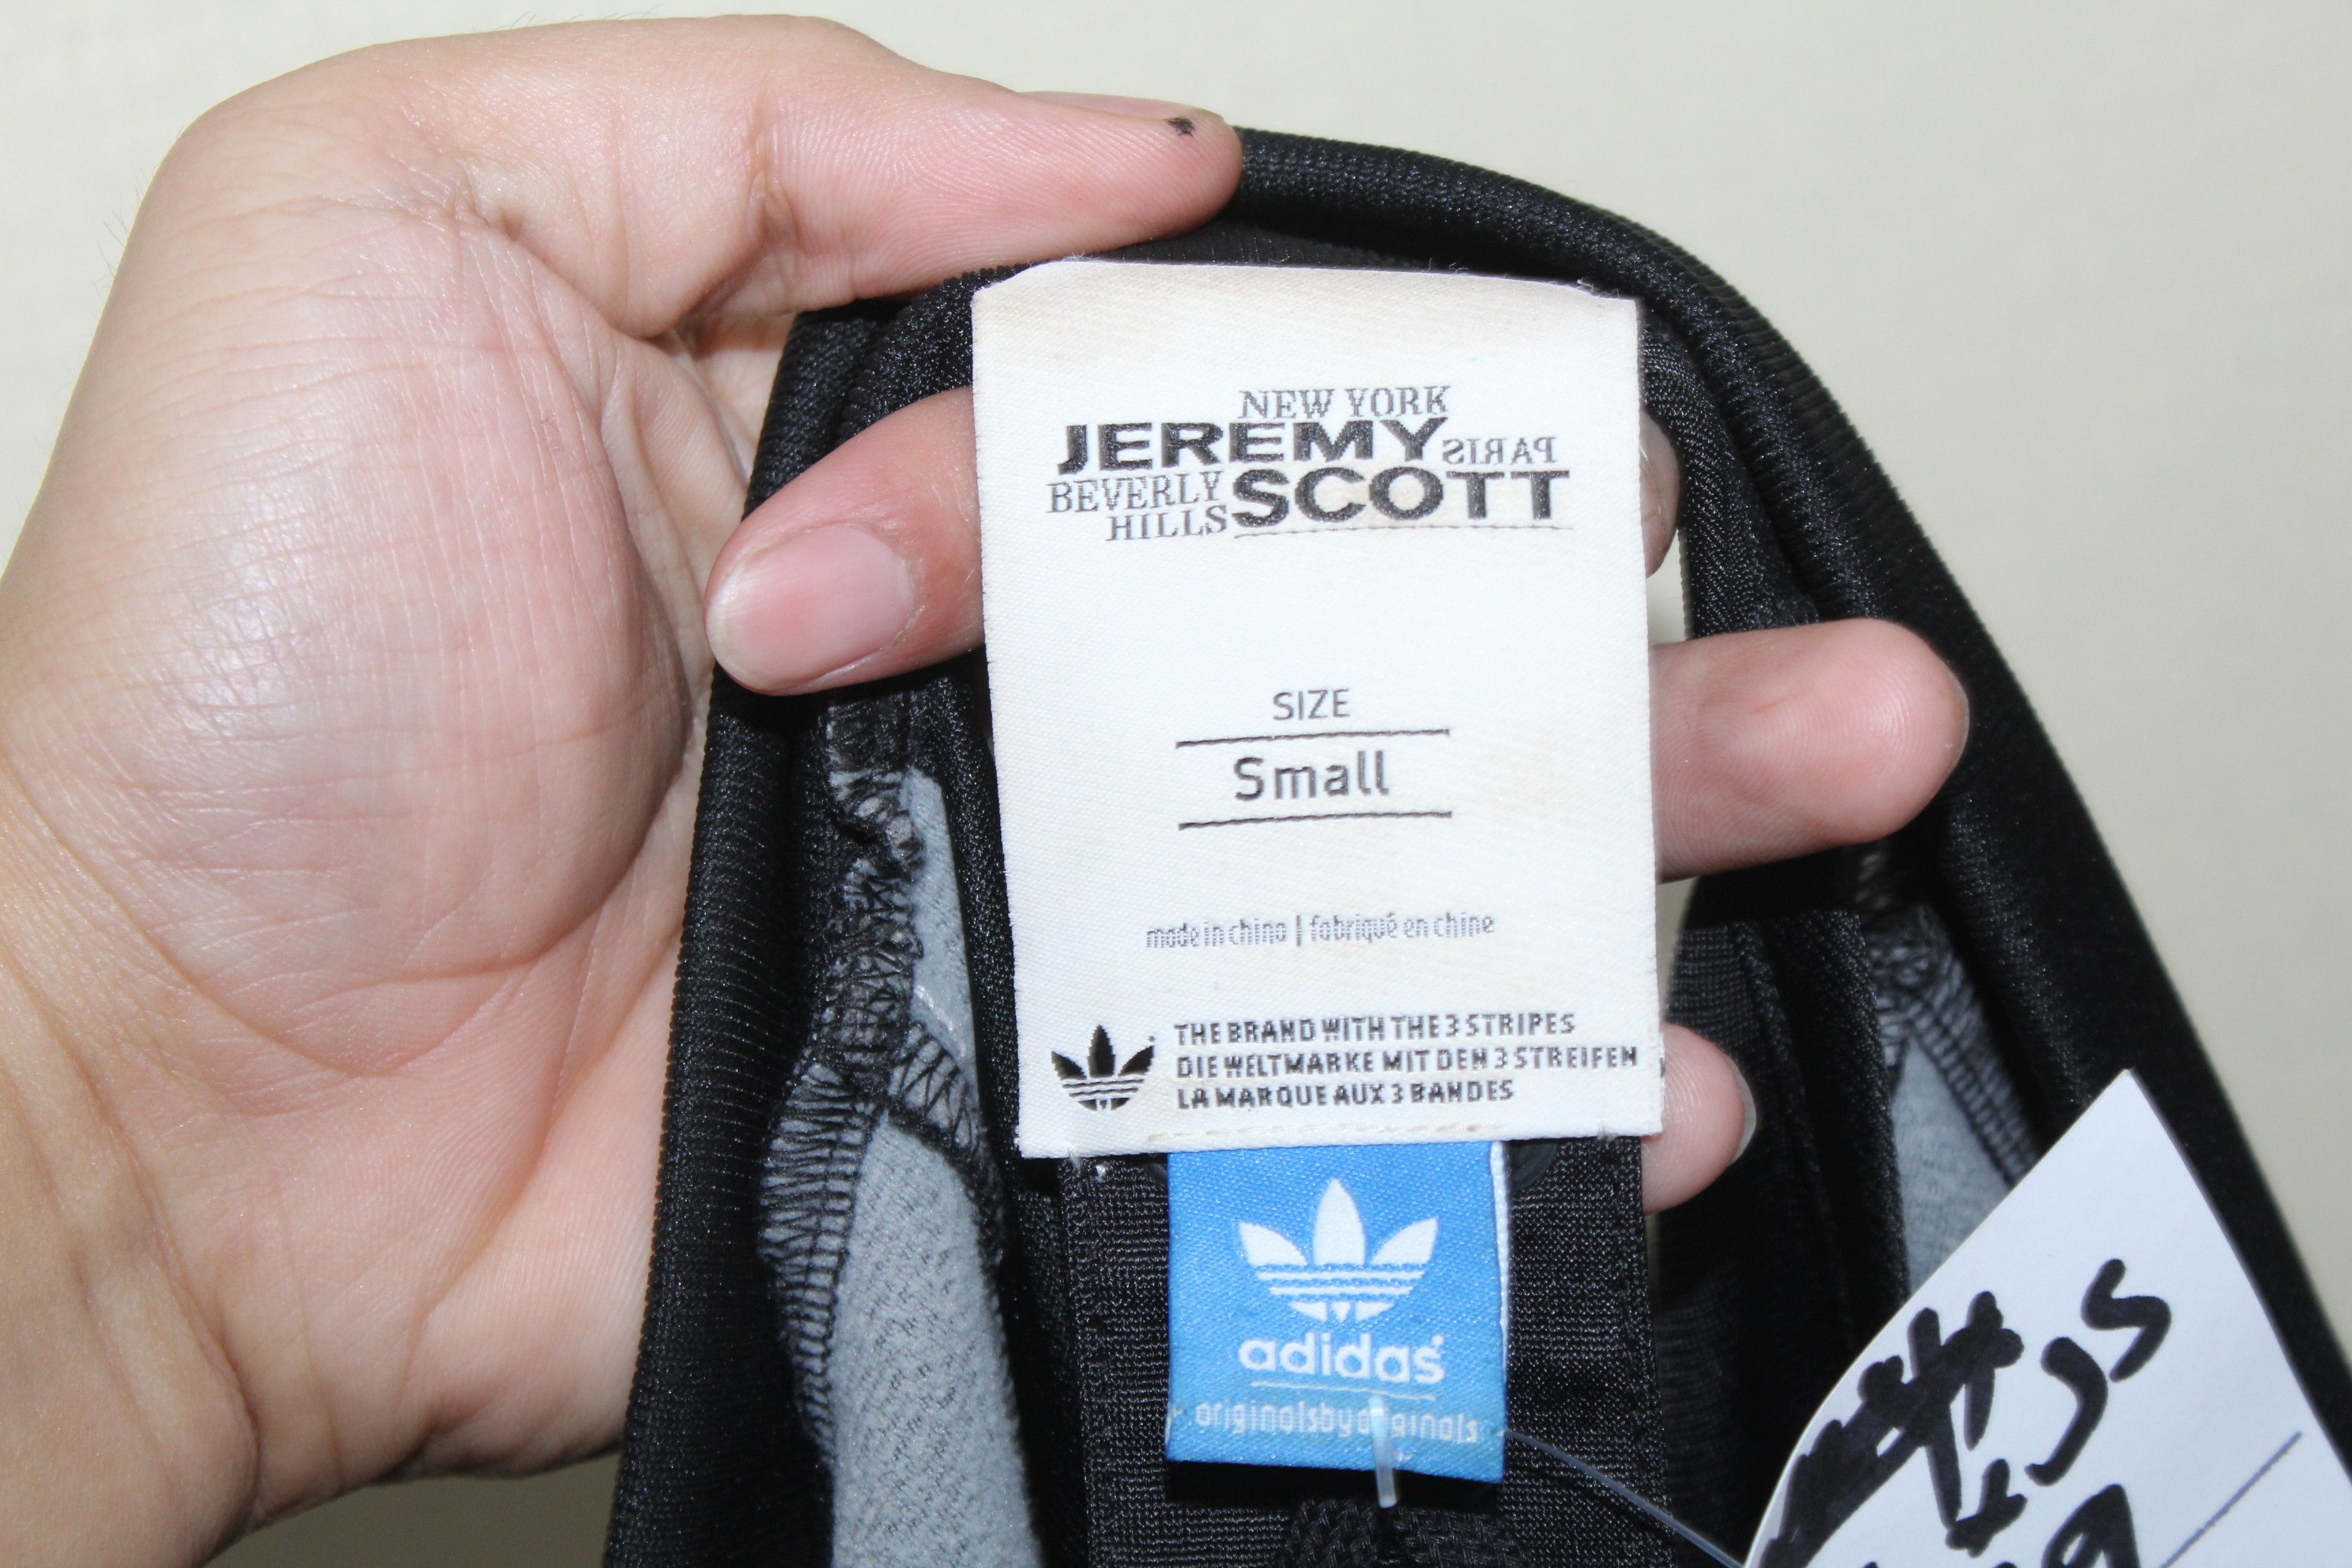 Adidas Cage jacket Size US S / EU 44-46 / 1 - 6 Preview